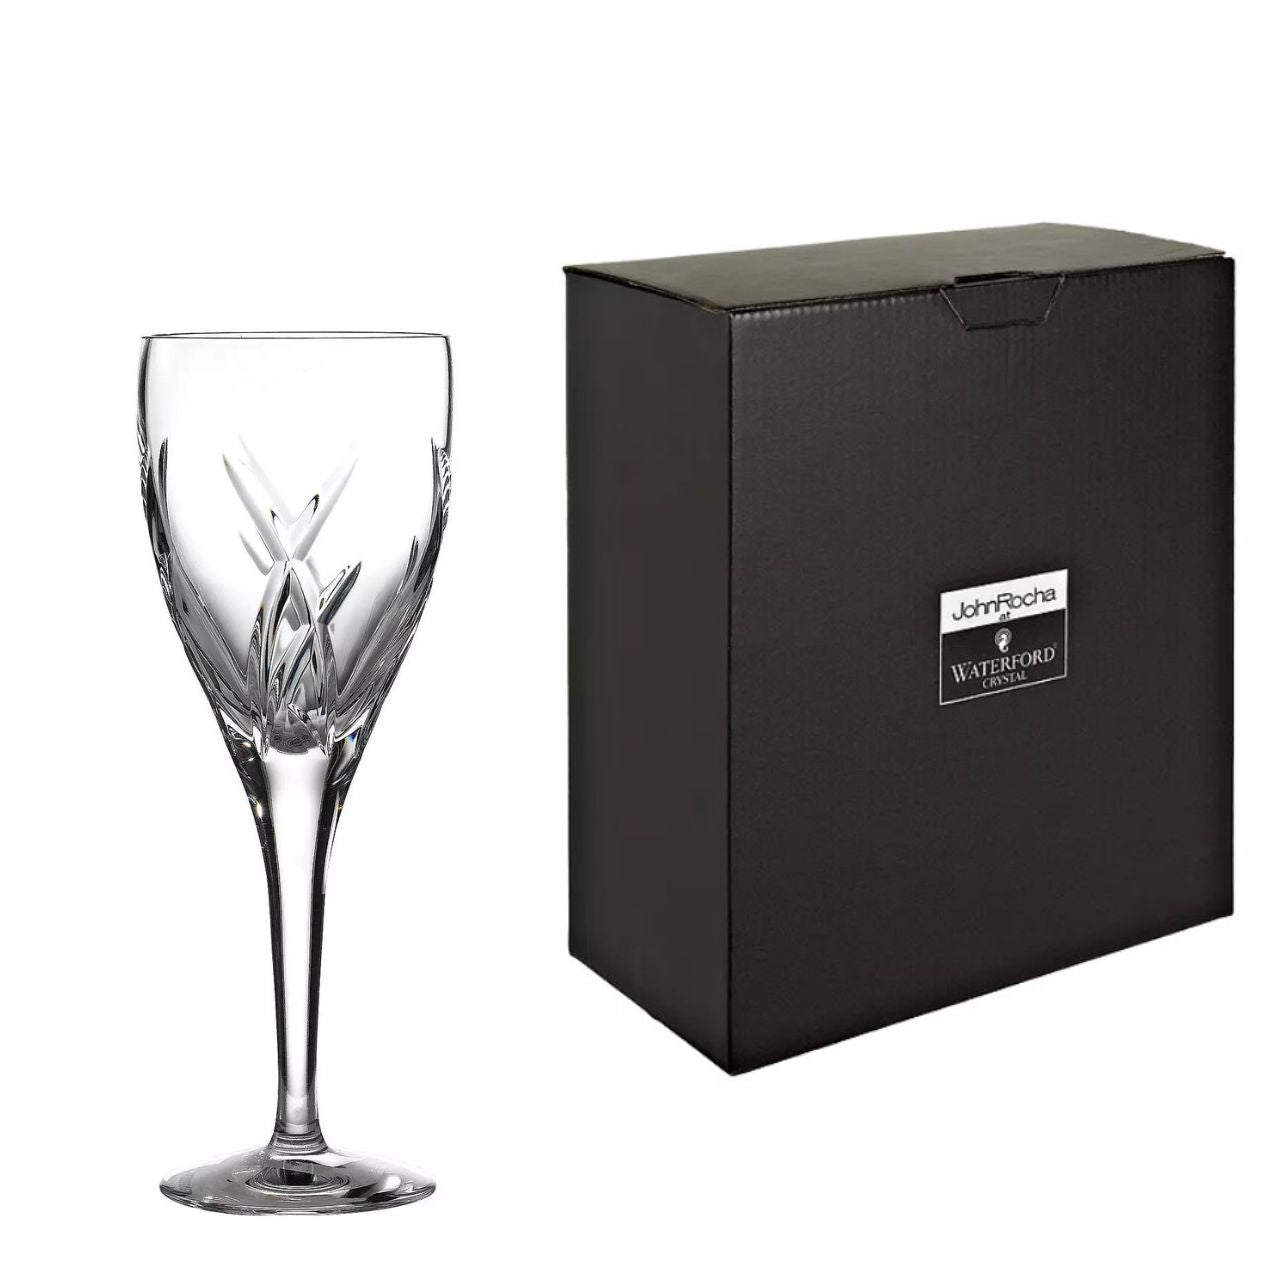 John Rocha Crystal Signature Red Wine Pair by Waterford  John Rocha contemporary collection Signature Red Wine Glasses. John Rocha's name is synonymous with simple, elegant and modern design which captures the clarity and purity expected of Waterford Crystal.